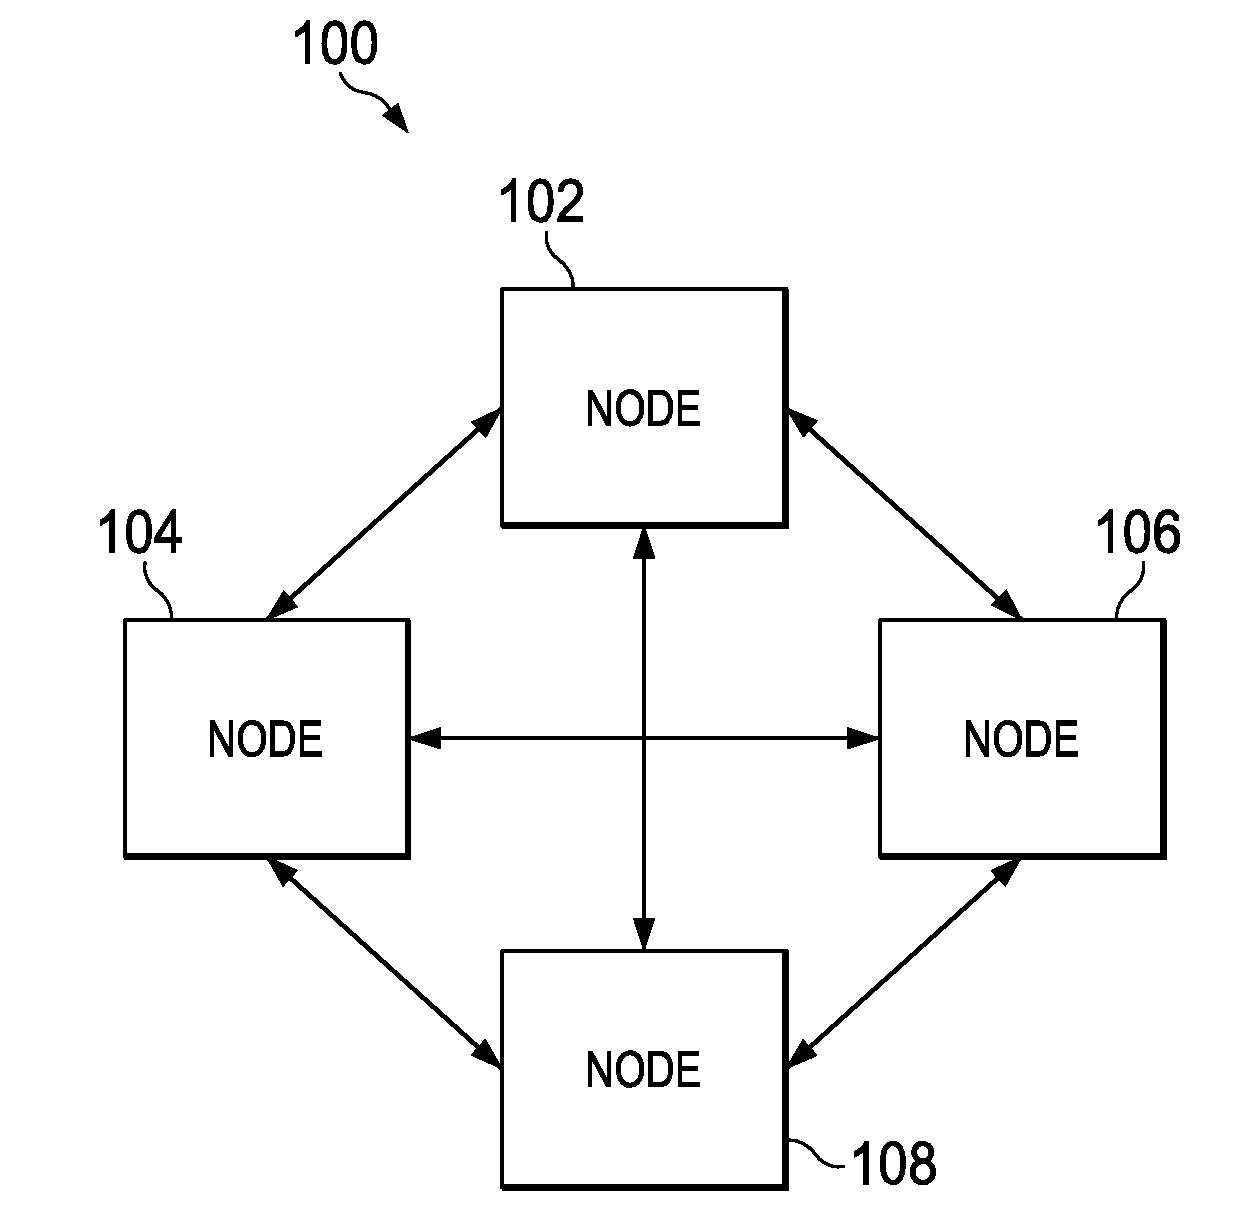 System and Method for Creating a Distributed Transaction Manager Supporting Repeatable Read Isolation level in a MPP Database